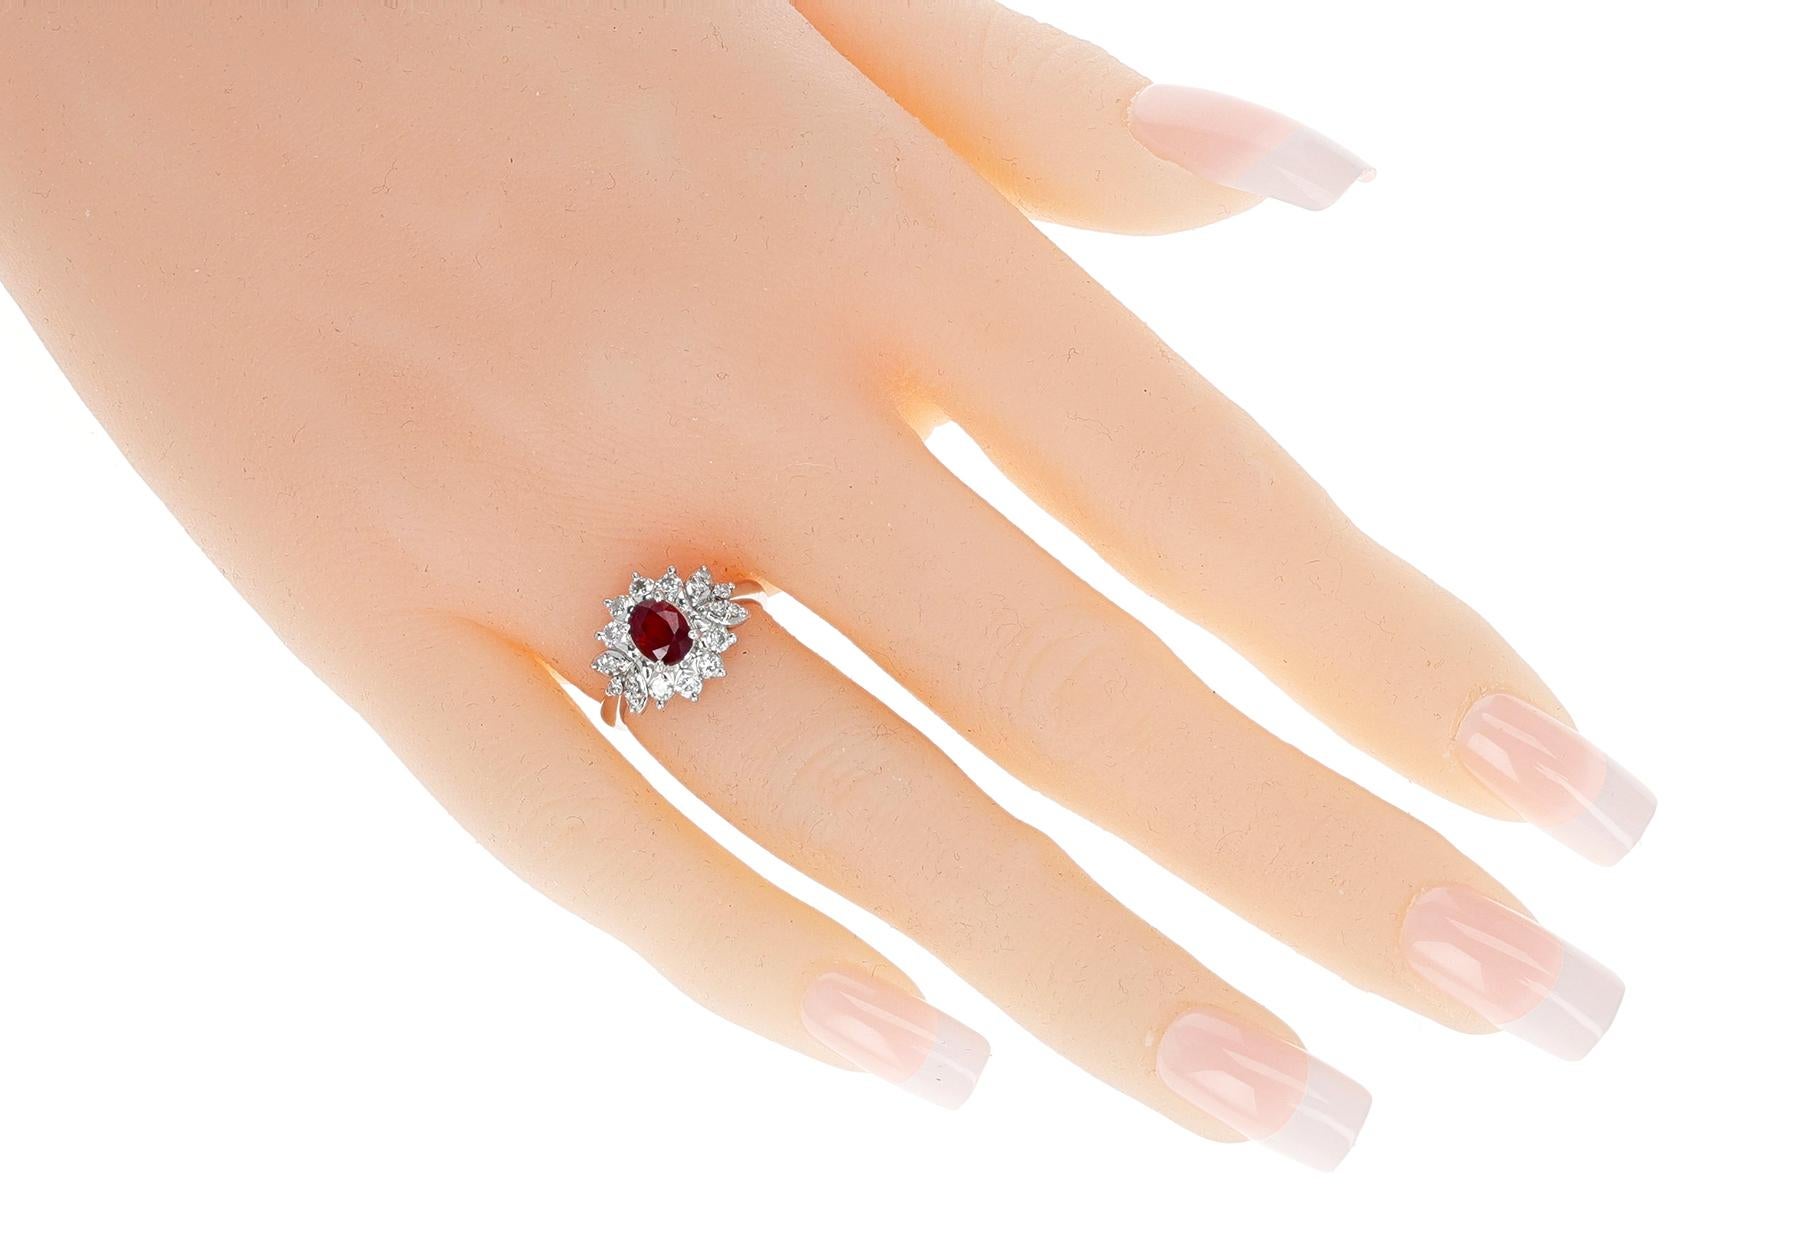 Oval Cut GIA Certified 1.01 Ct. Pigeon Blood Burma Ruby and Diamond Ring, Platinum For Sale